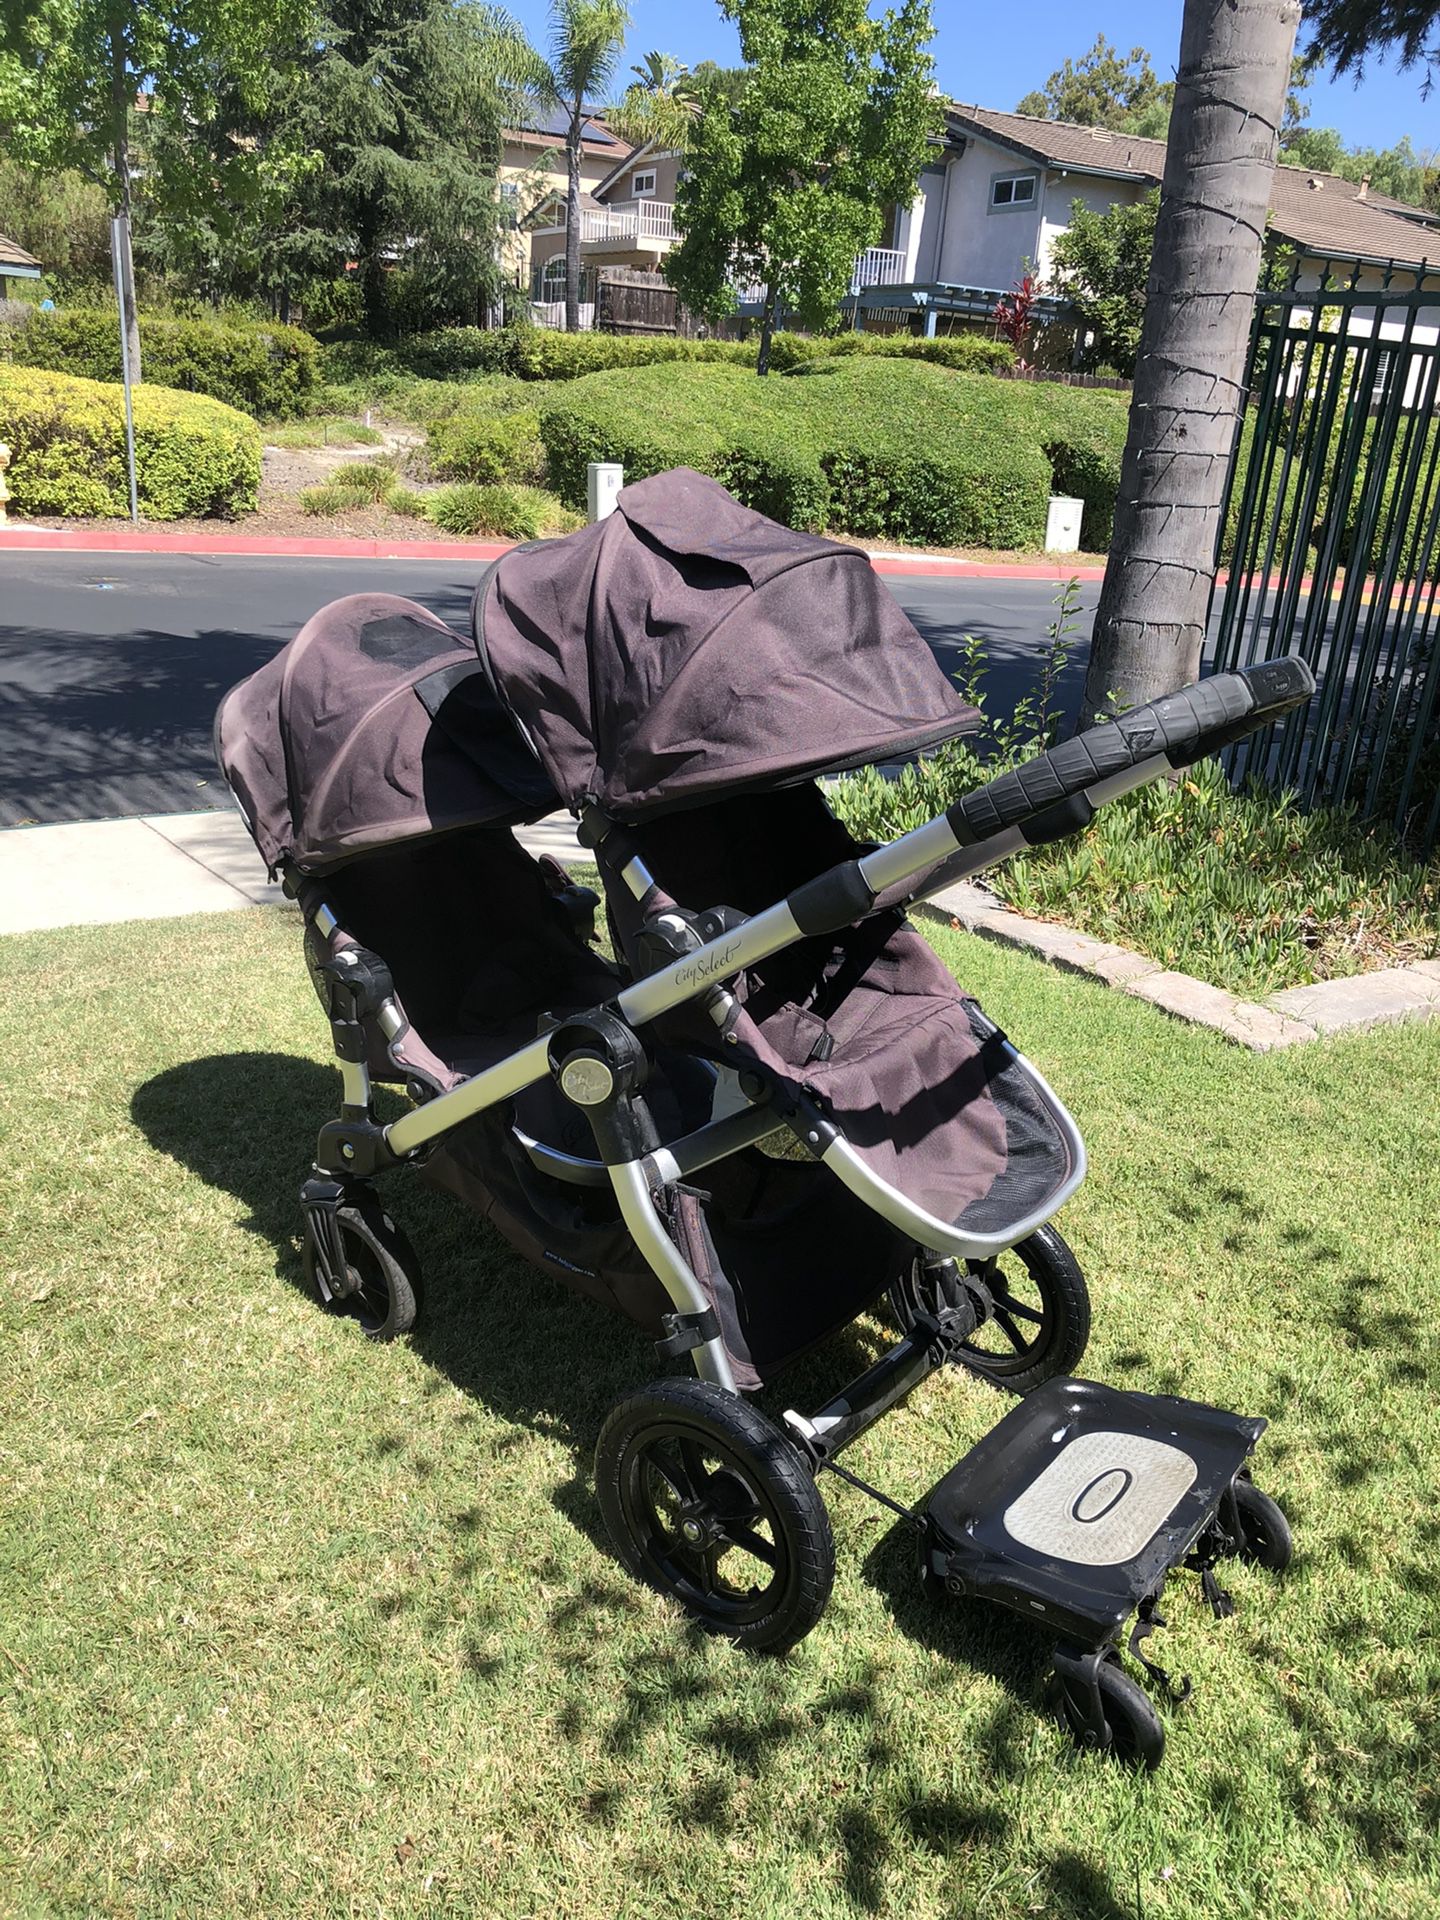 Baby jogger city select double stroller